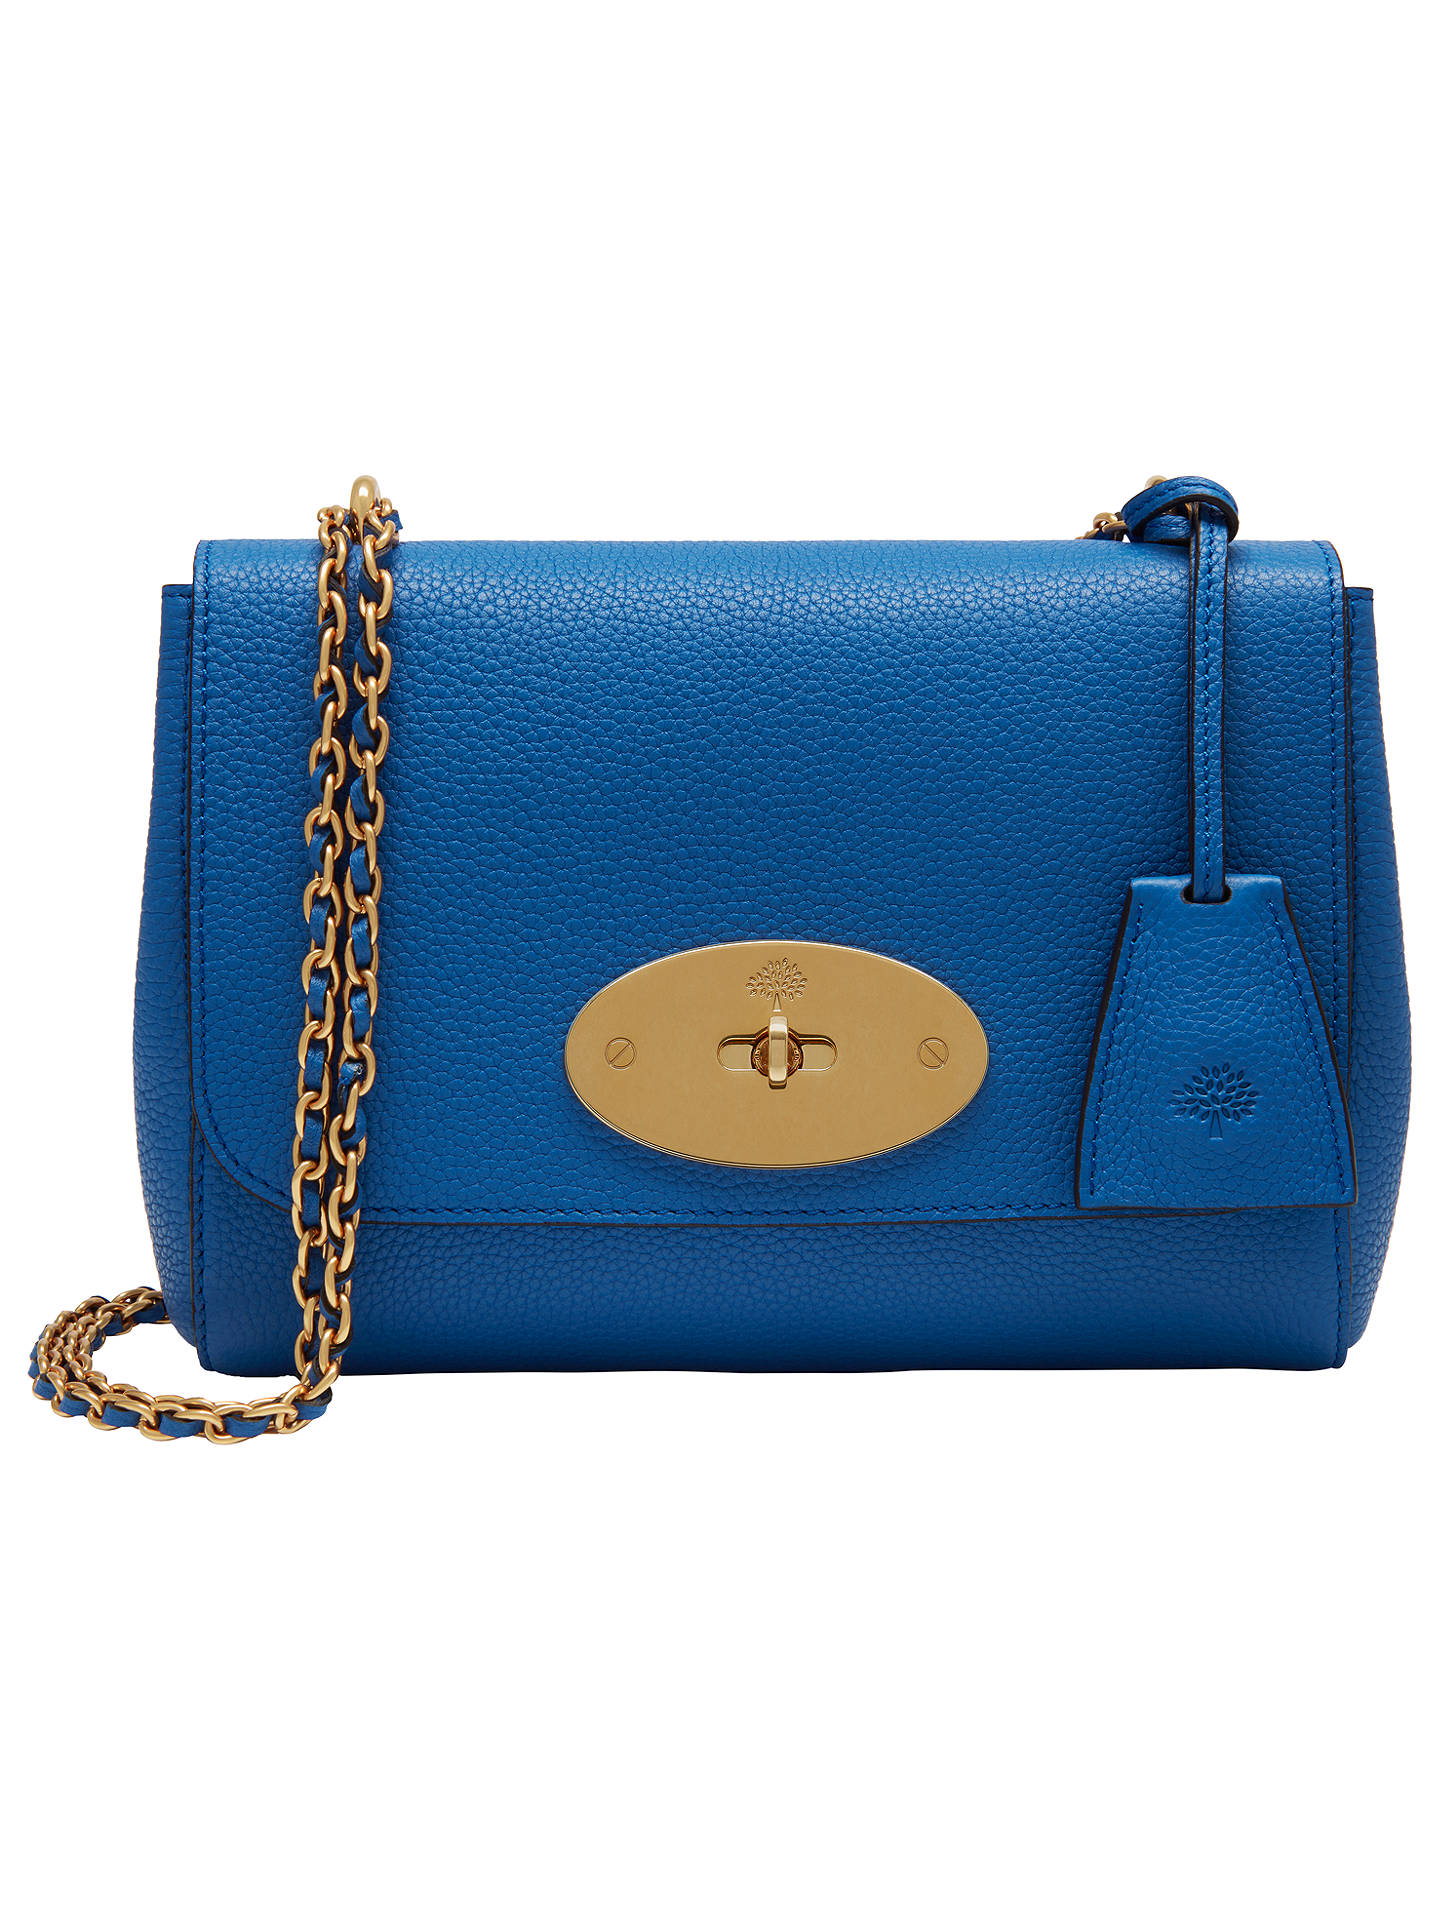 Mulberry Lily Small Classic Grain Leather Shoulder Bag at John Lewis ...